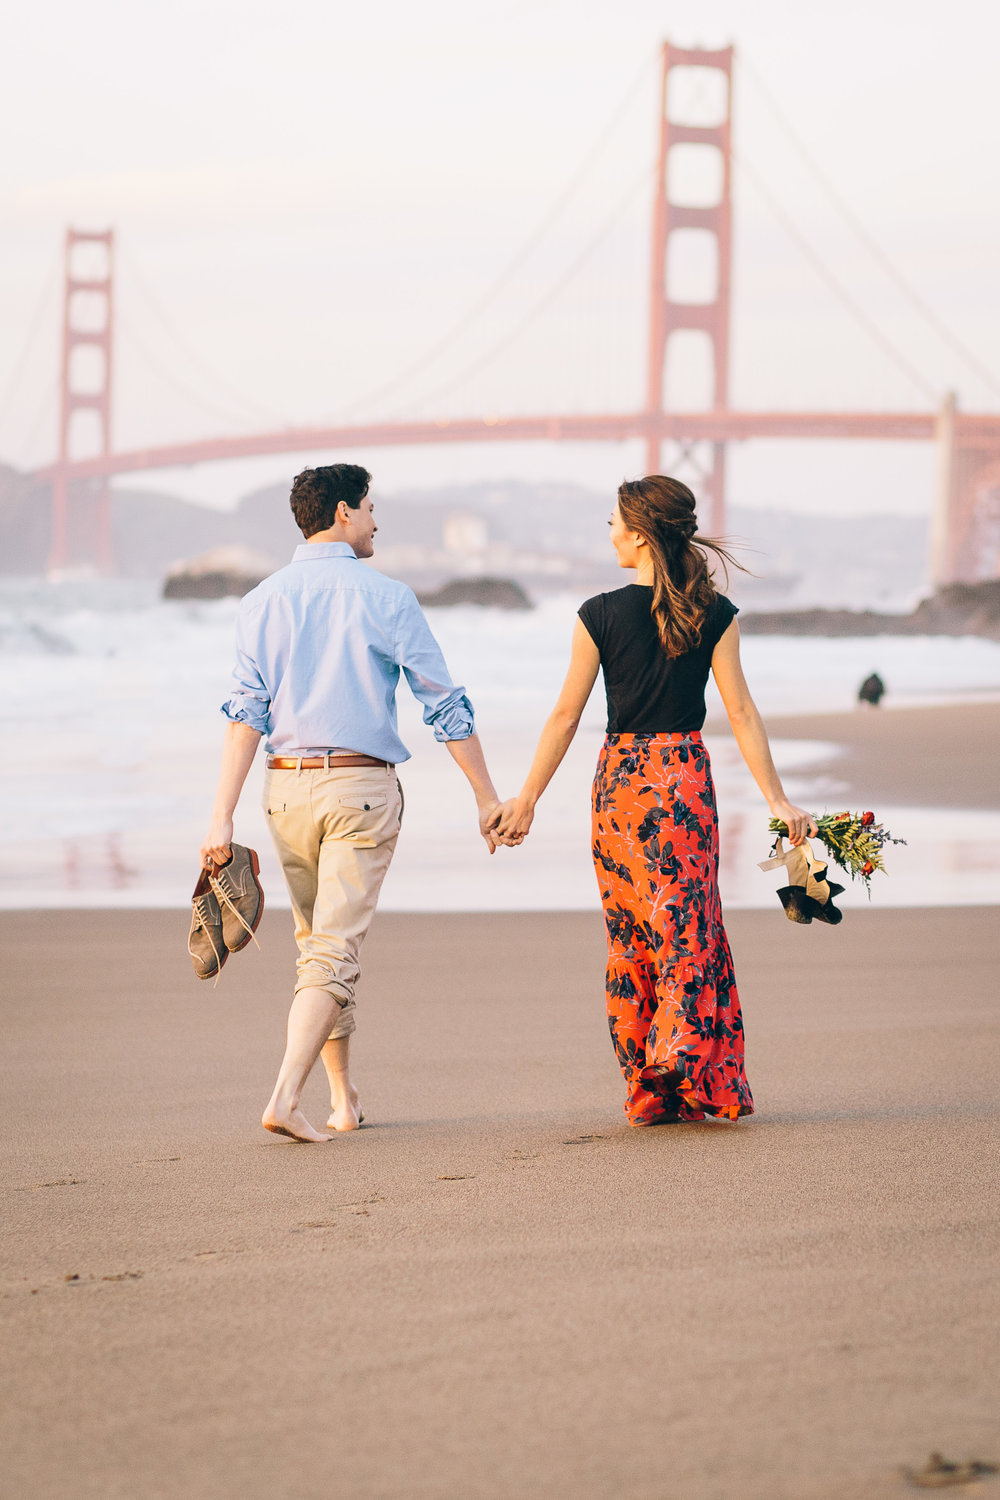 Best Engagement Photo Locations in San Francisco - Baker Beach Engagement Photos by JBJ Pictures (2).jpg